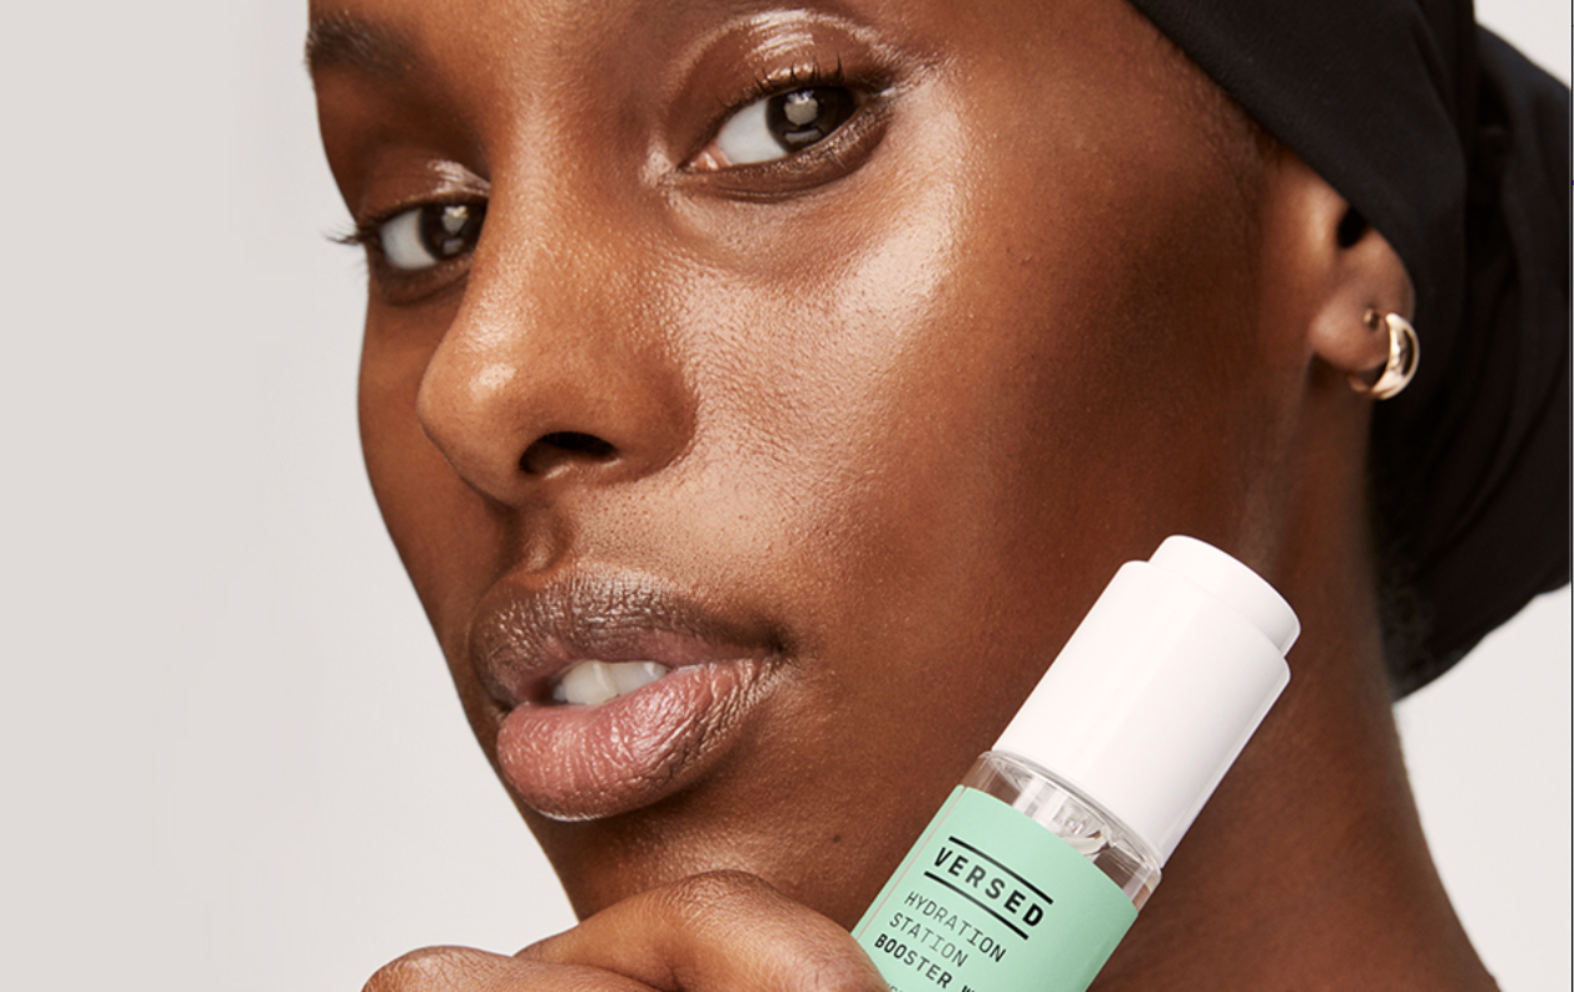 Woman holding Versed skincare product against her face